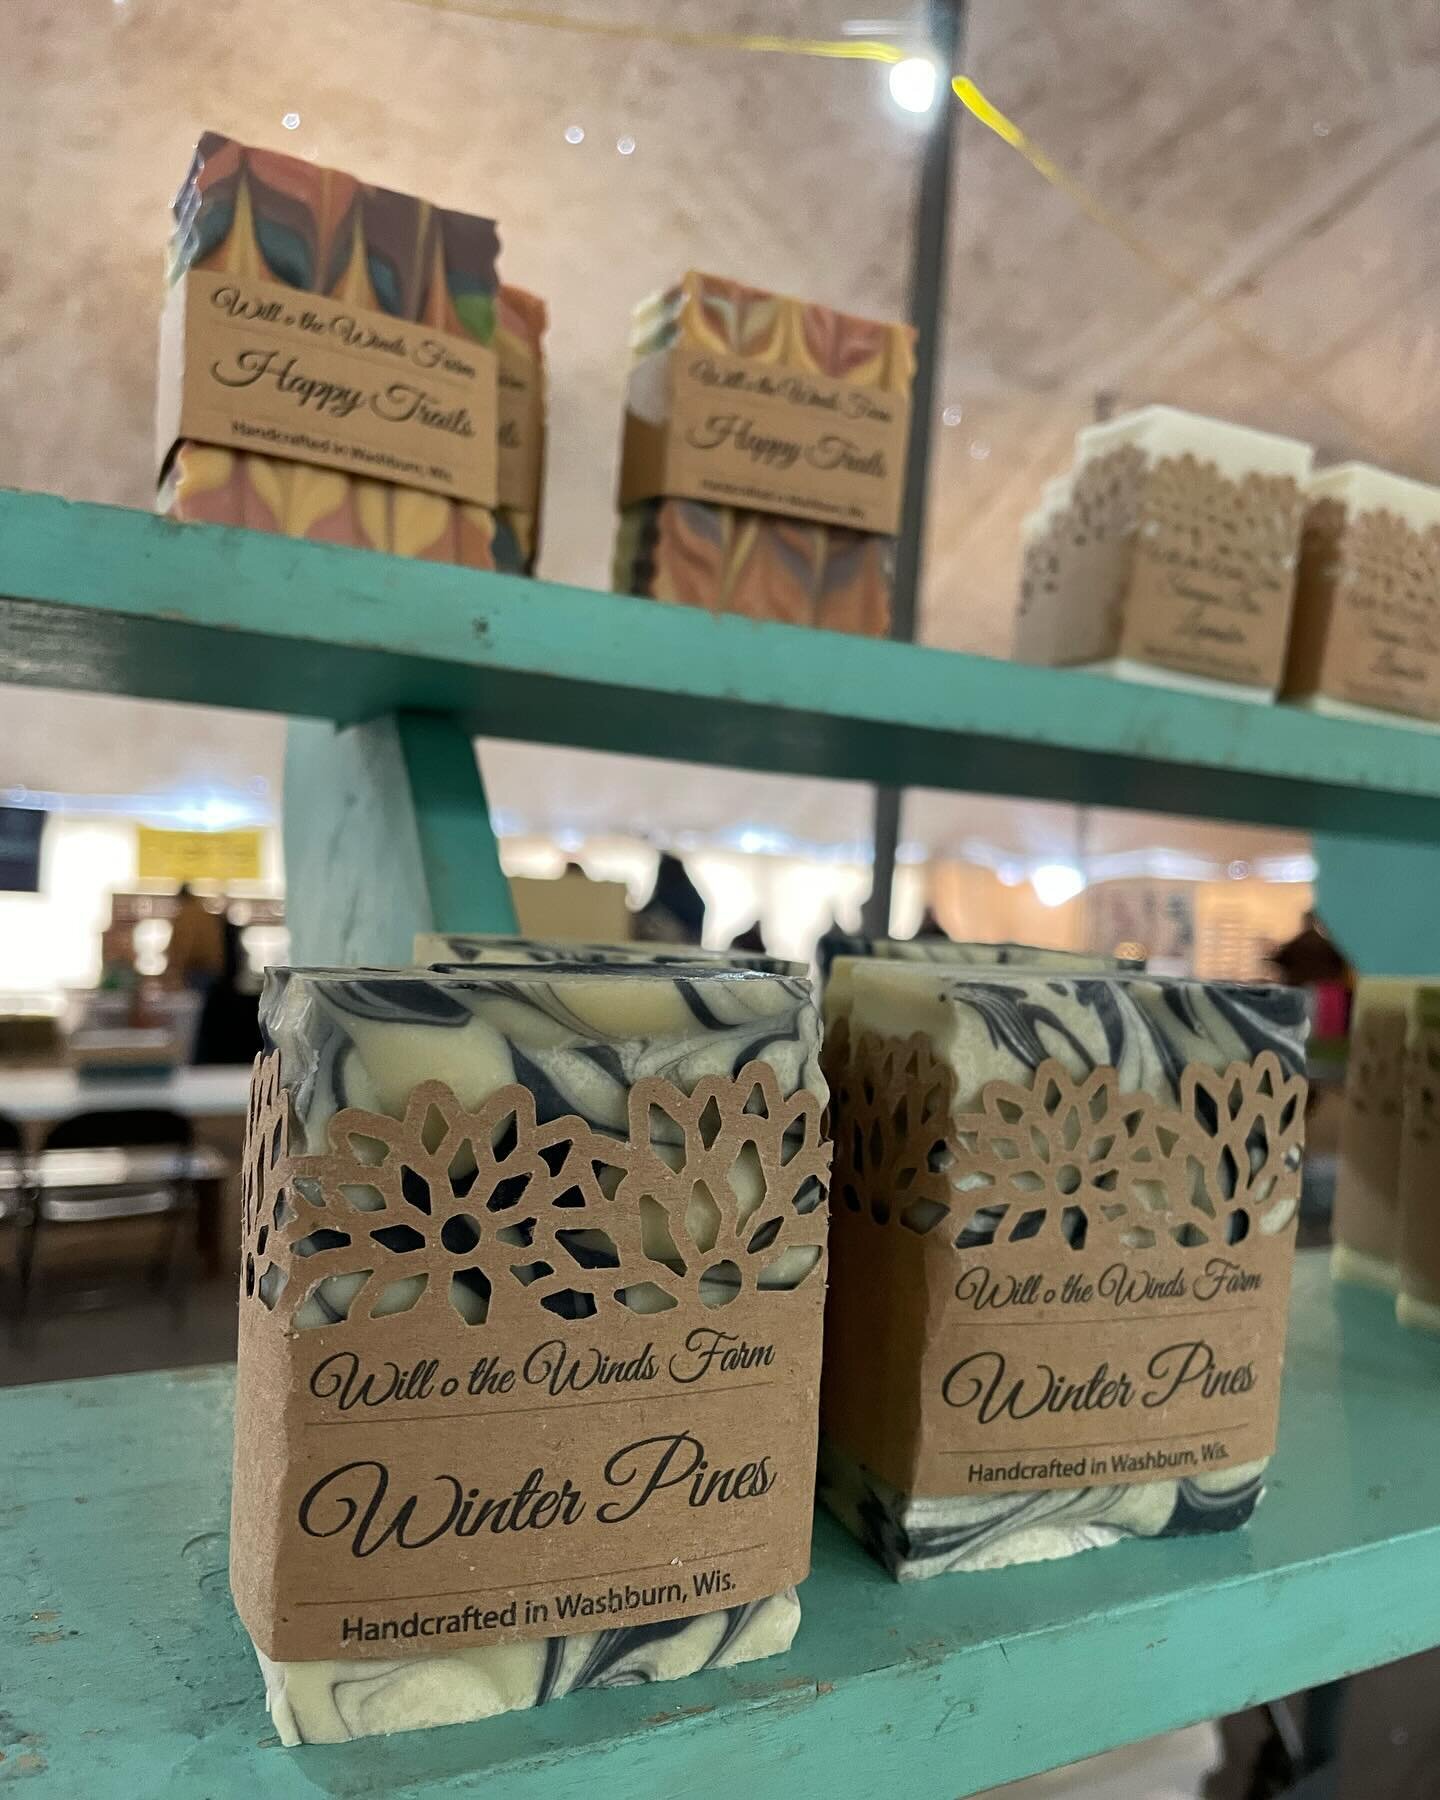 Today is Book Across the Bay @batb_wi and I&rsquo;m here selling soap until 5 pm or so. Come on by and check out all of the amazing vendors selling goods outside in the winter. Thankfully the propane heaters are on and working wonderfully. #homemades